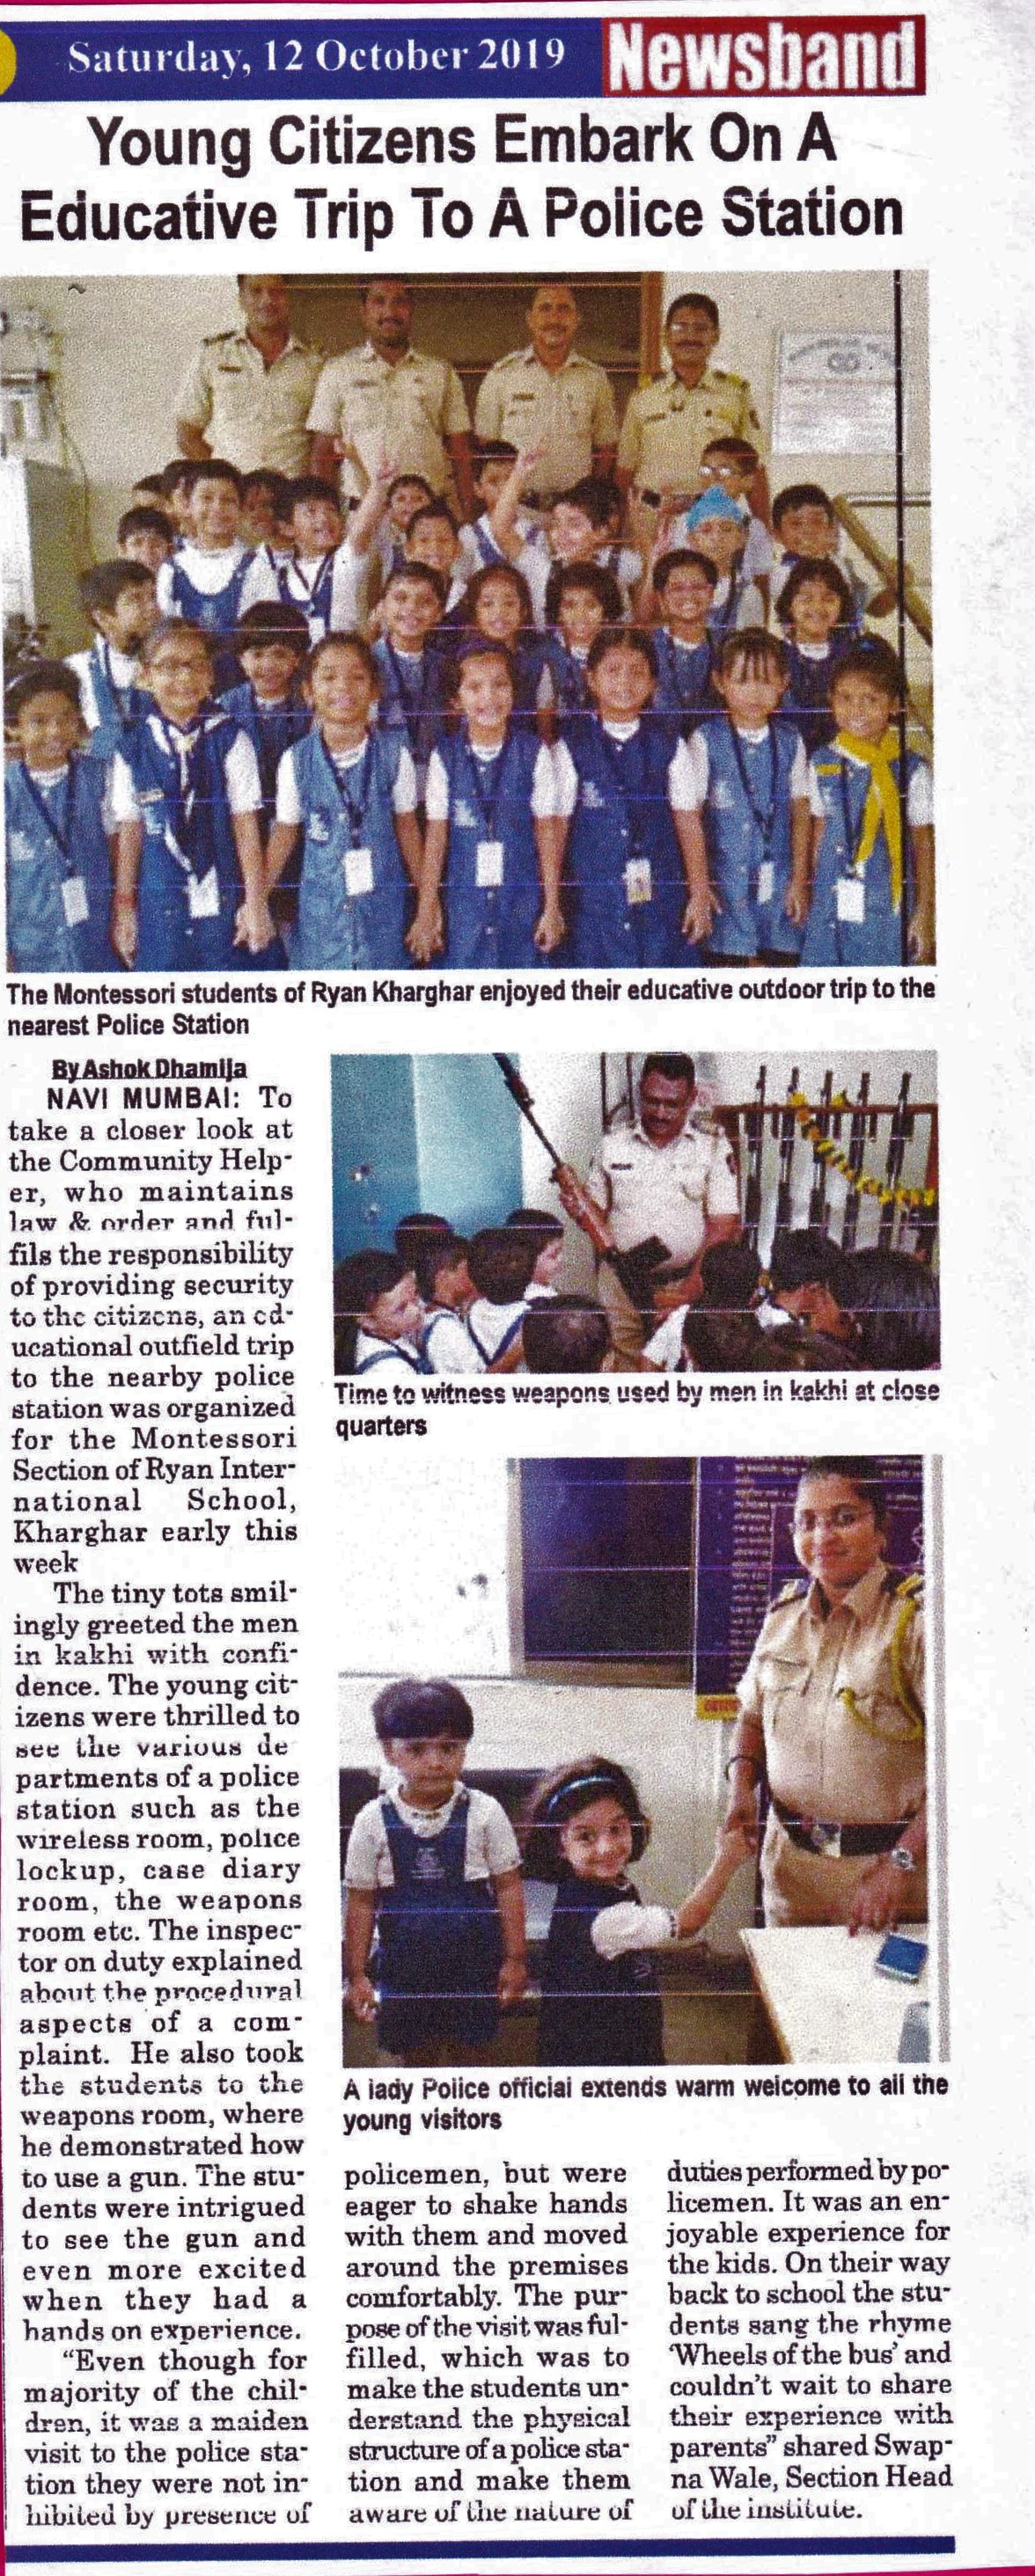 Young Citizens Embark On A educative trip to a police station was mentioned in News band - Ryan International School, Kharghar - Ryan Group